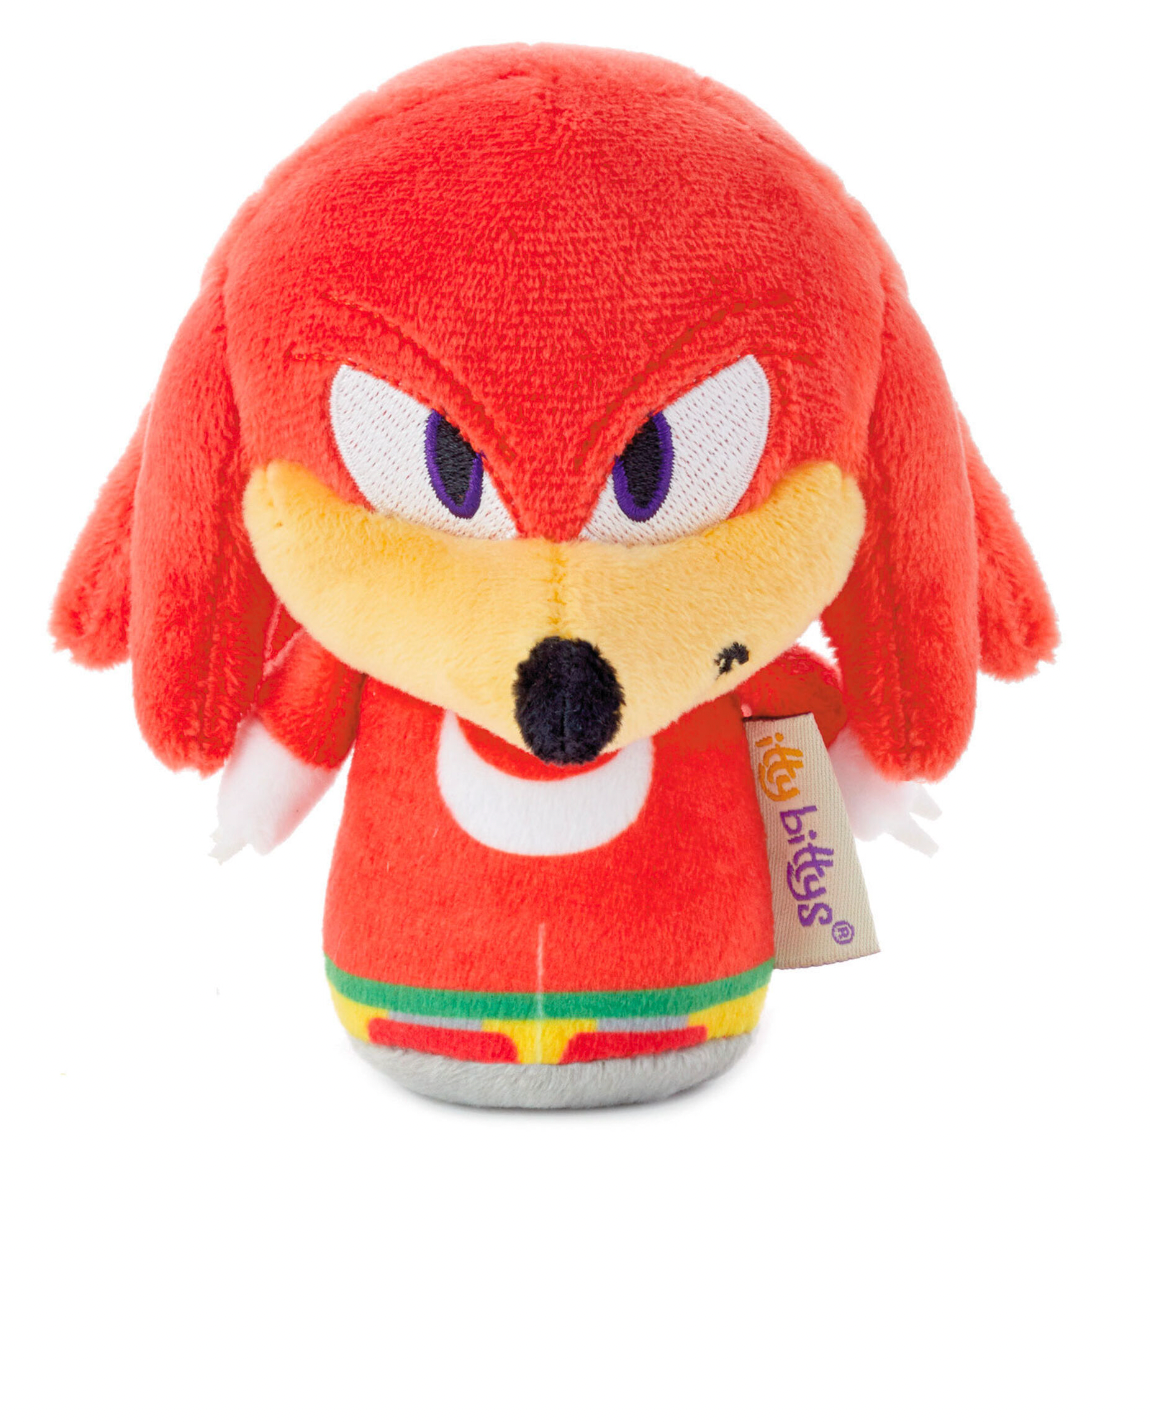 Itty Bittys Sonic the Hedgehog Knuckles Plush New with Tag